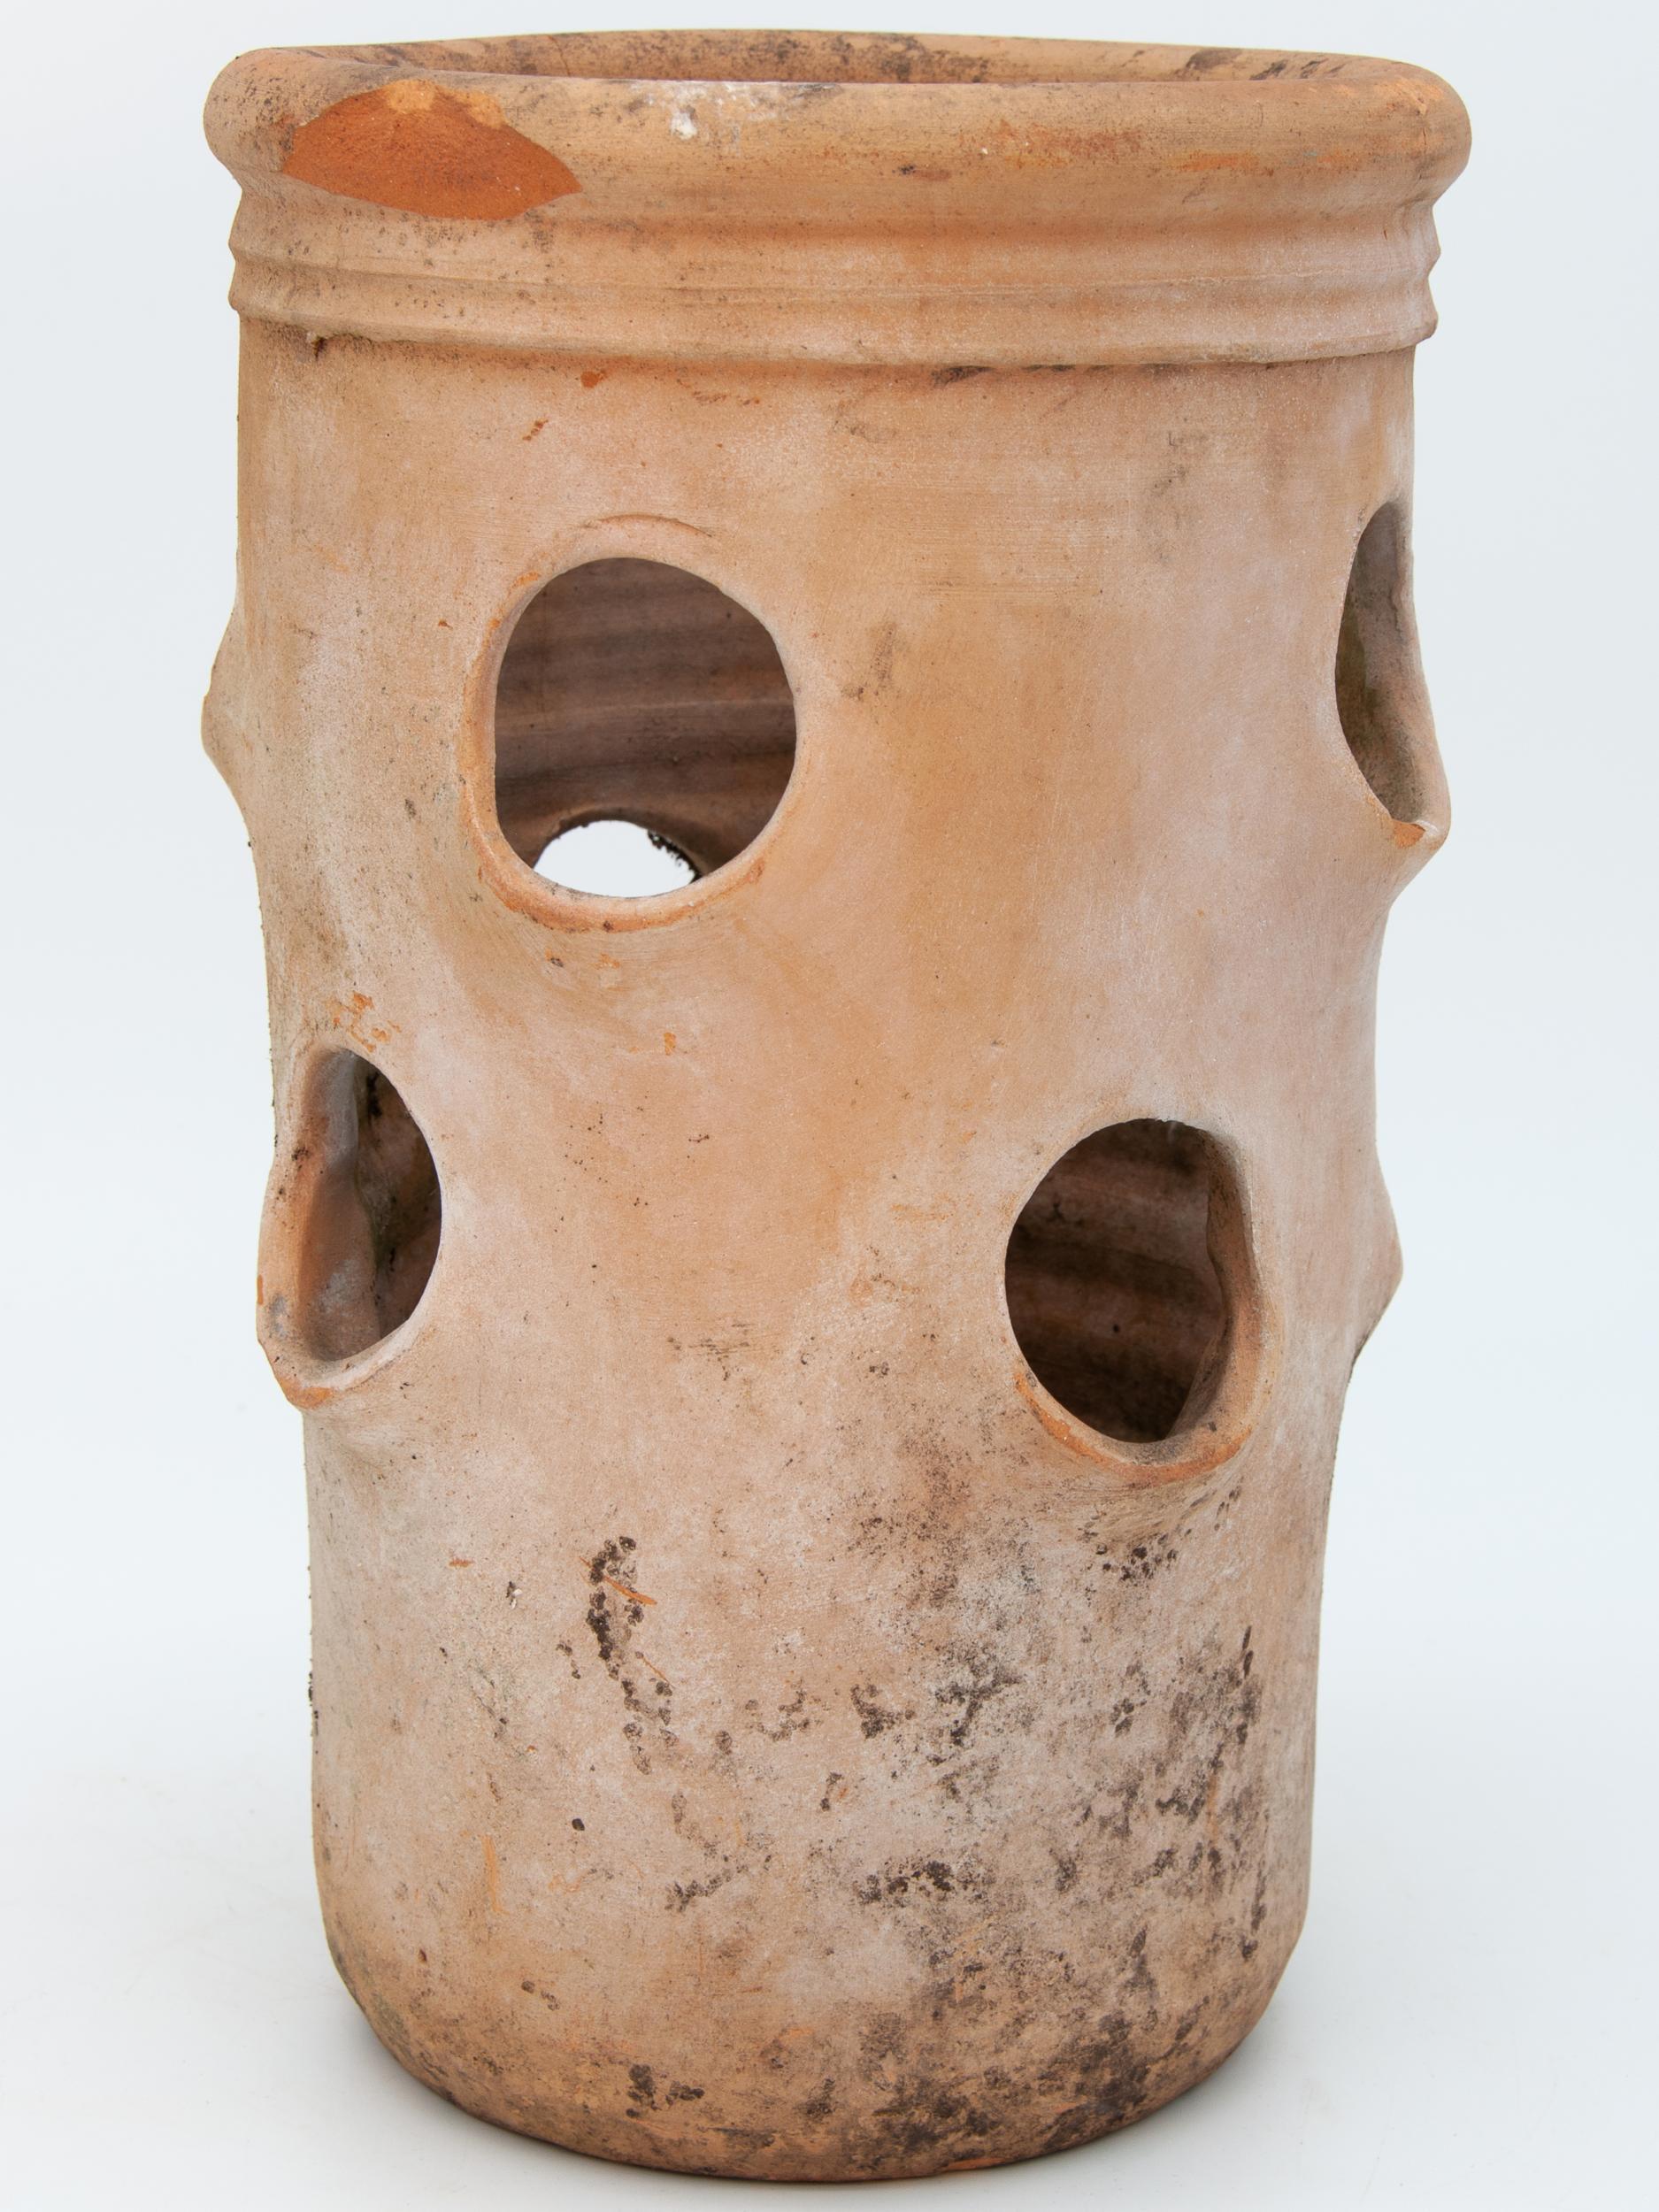 The shape and style of these pots have been perfected to grow Strawberries in. This Strawberry pot made from terracotta features side planting holes at two heights and has an unusual vertical shape with an open top. Early 20th century.